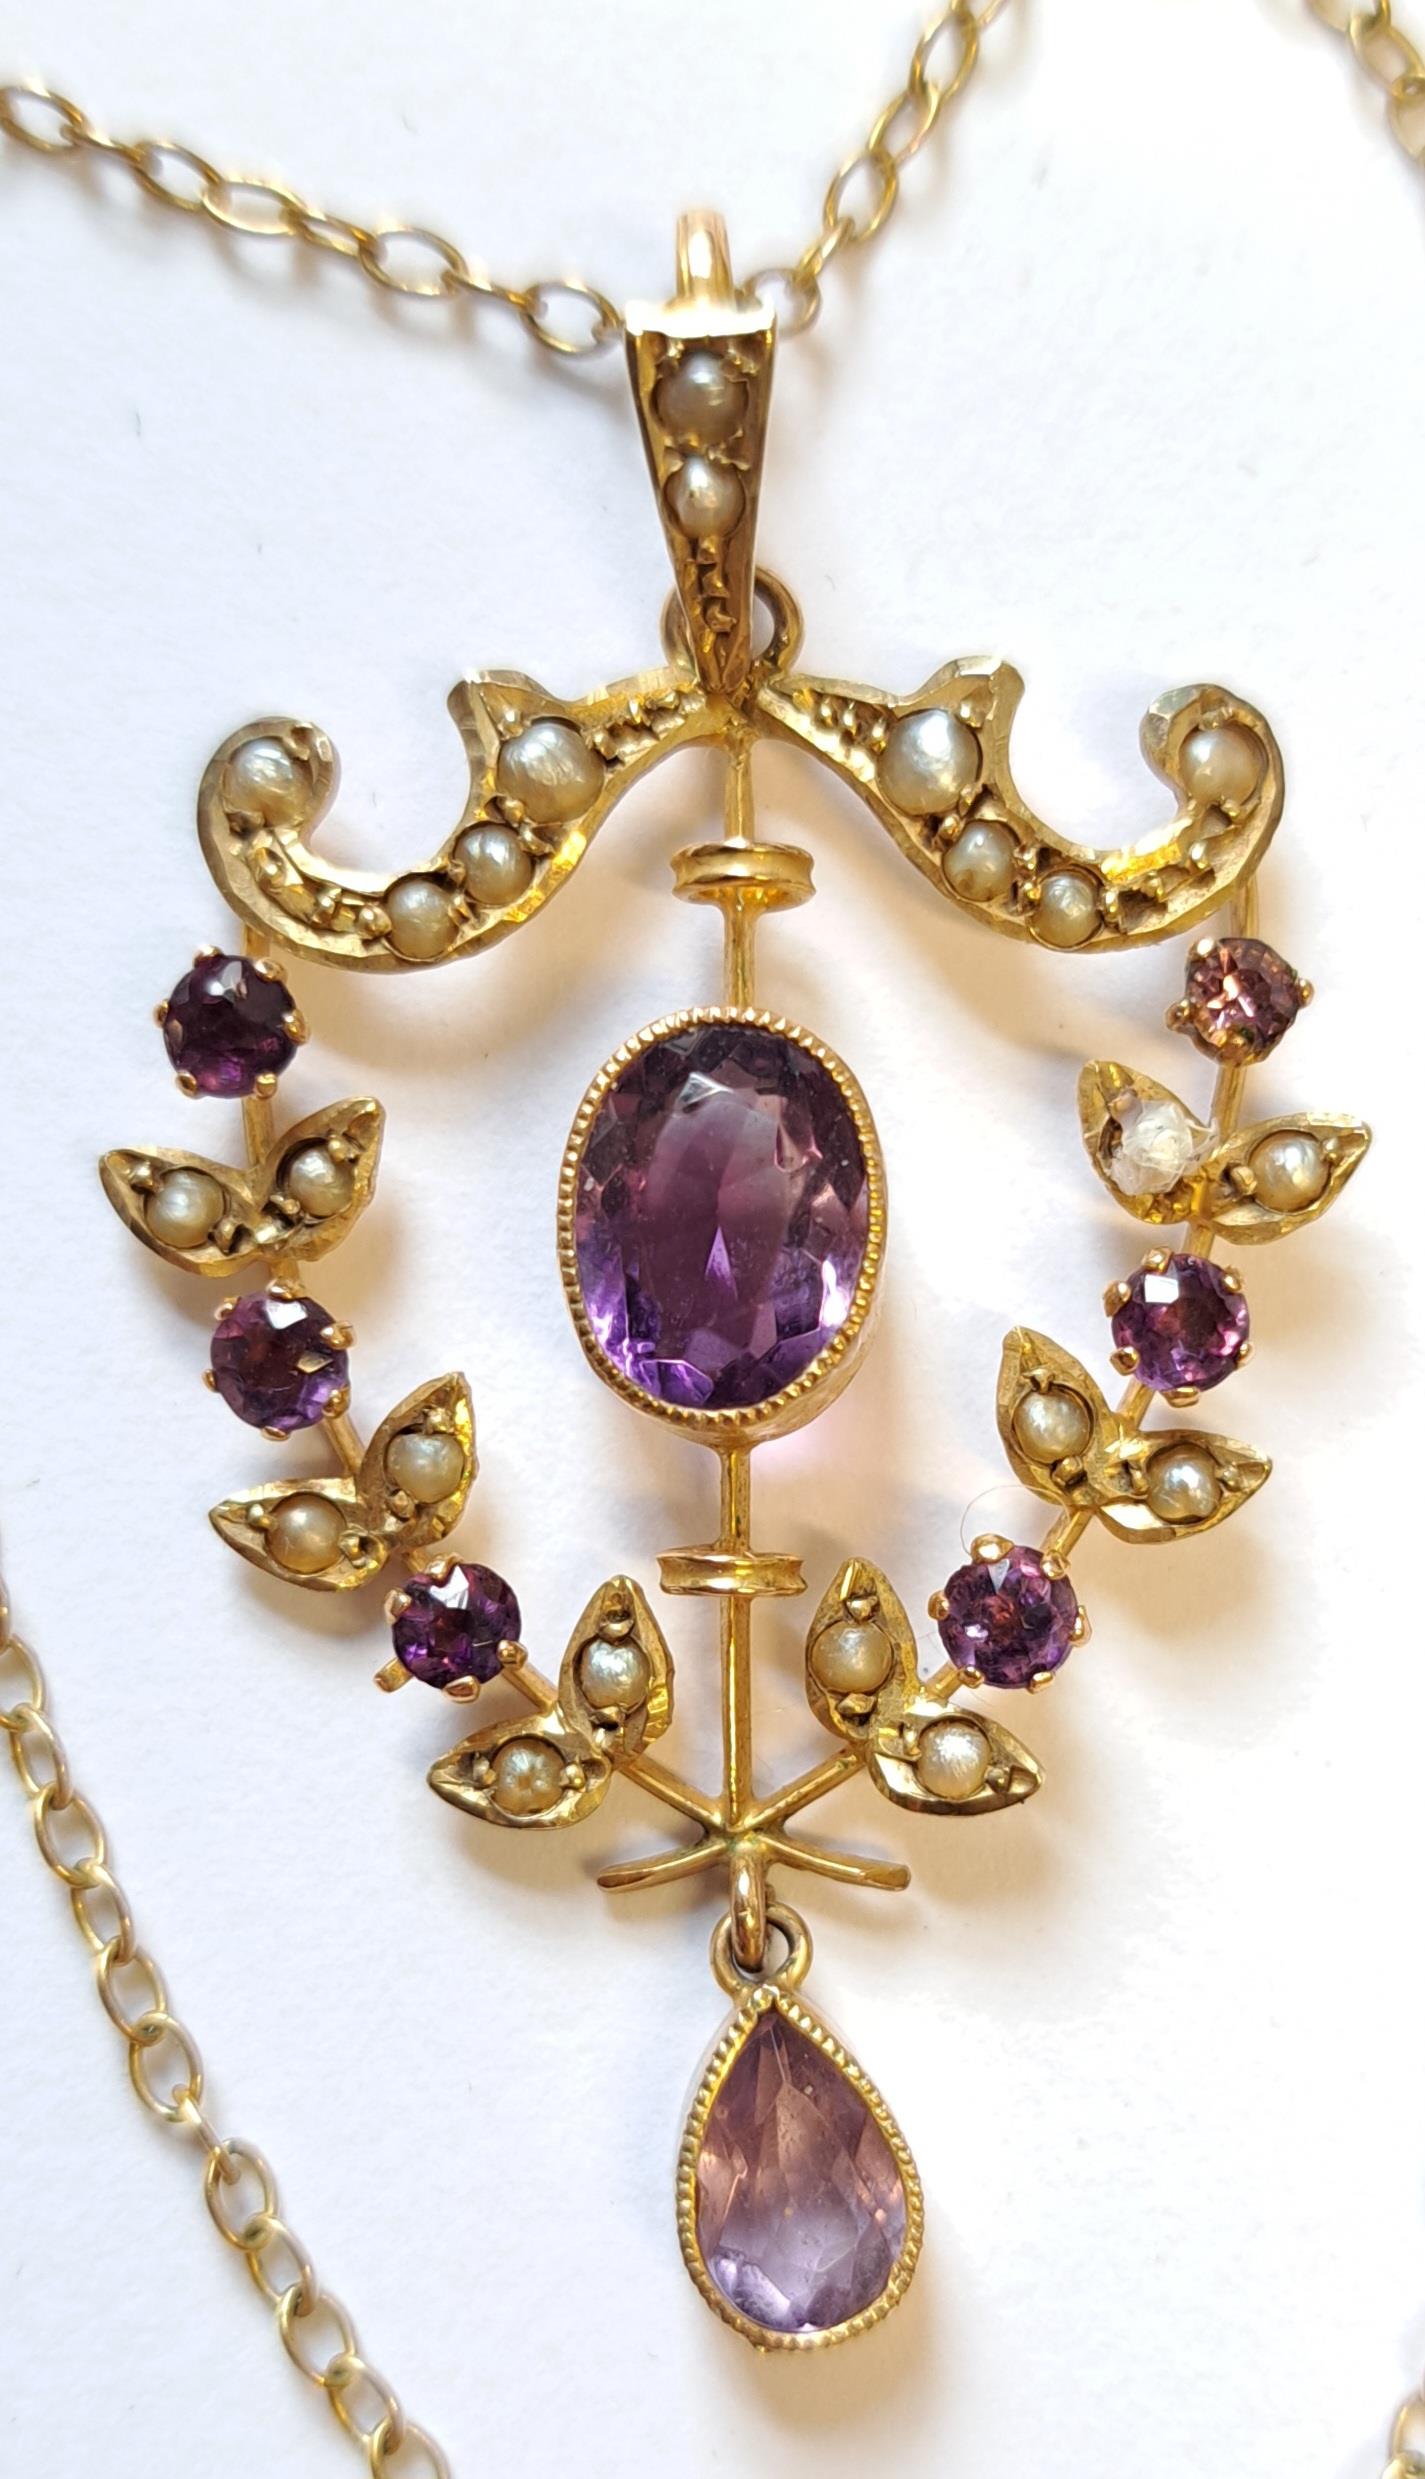 Edwardian 9ct gold amethyst and pearl set pendant on chain - Image 2 of 2